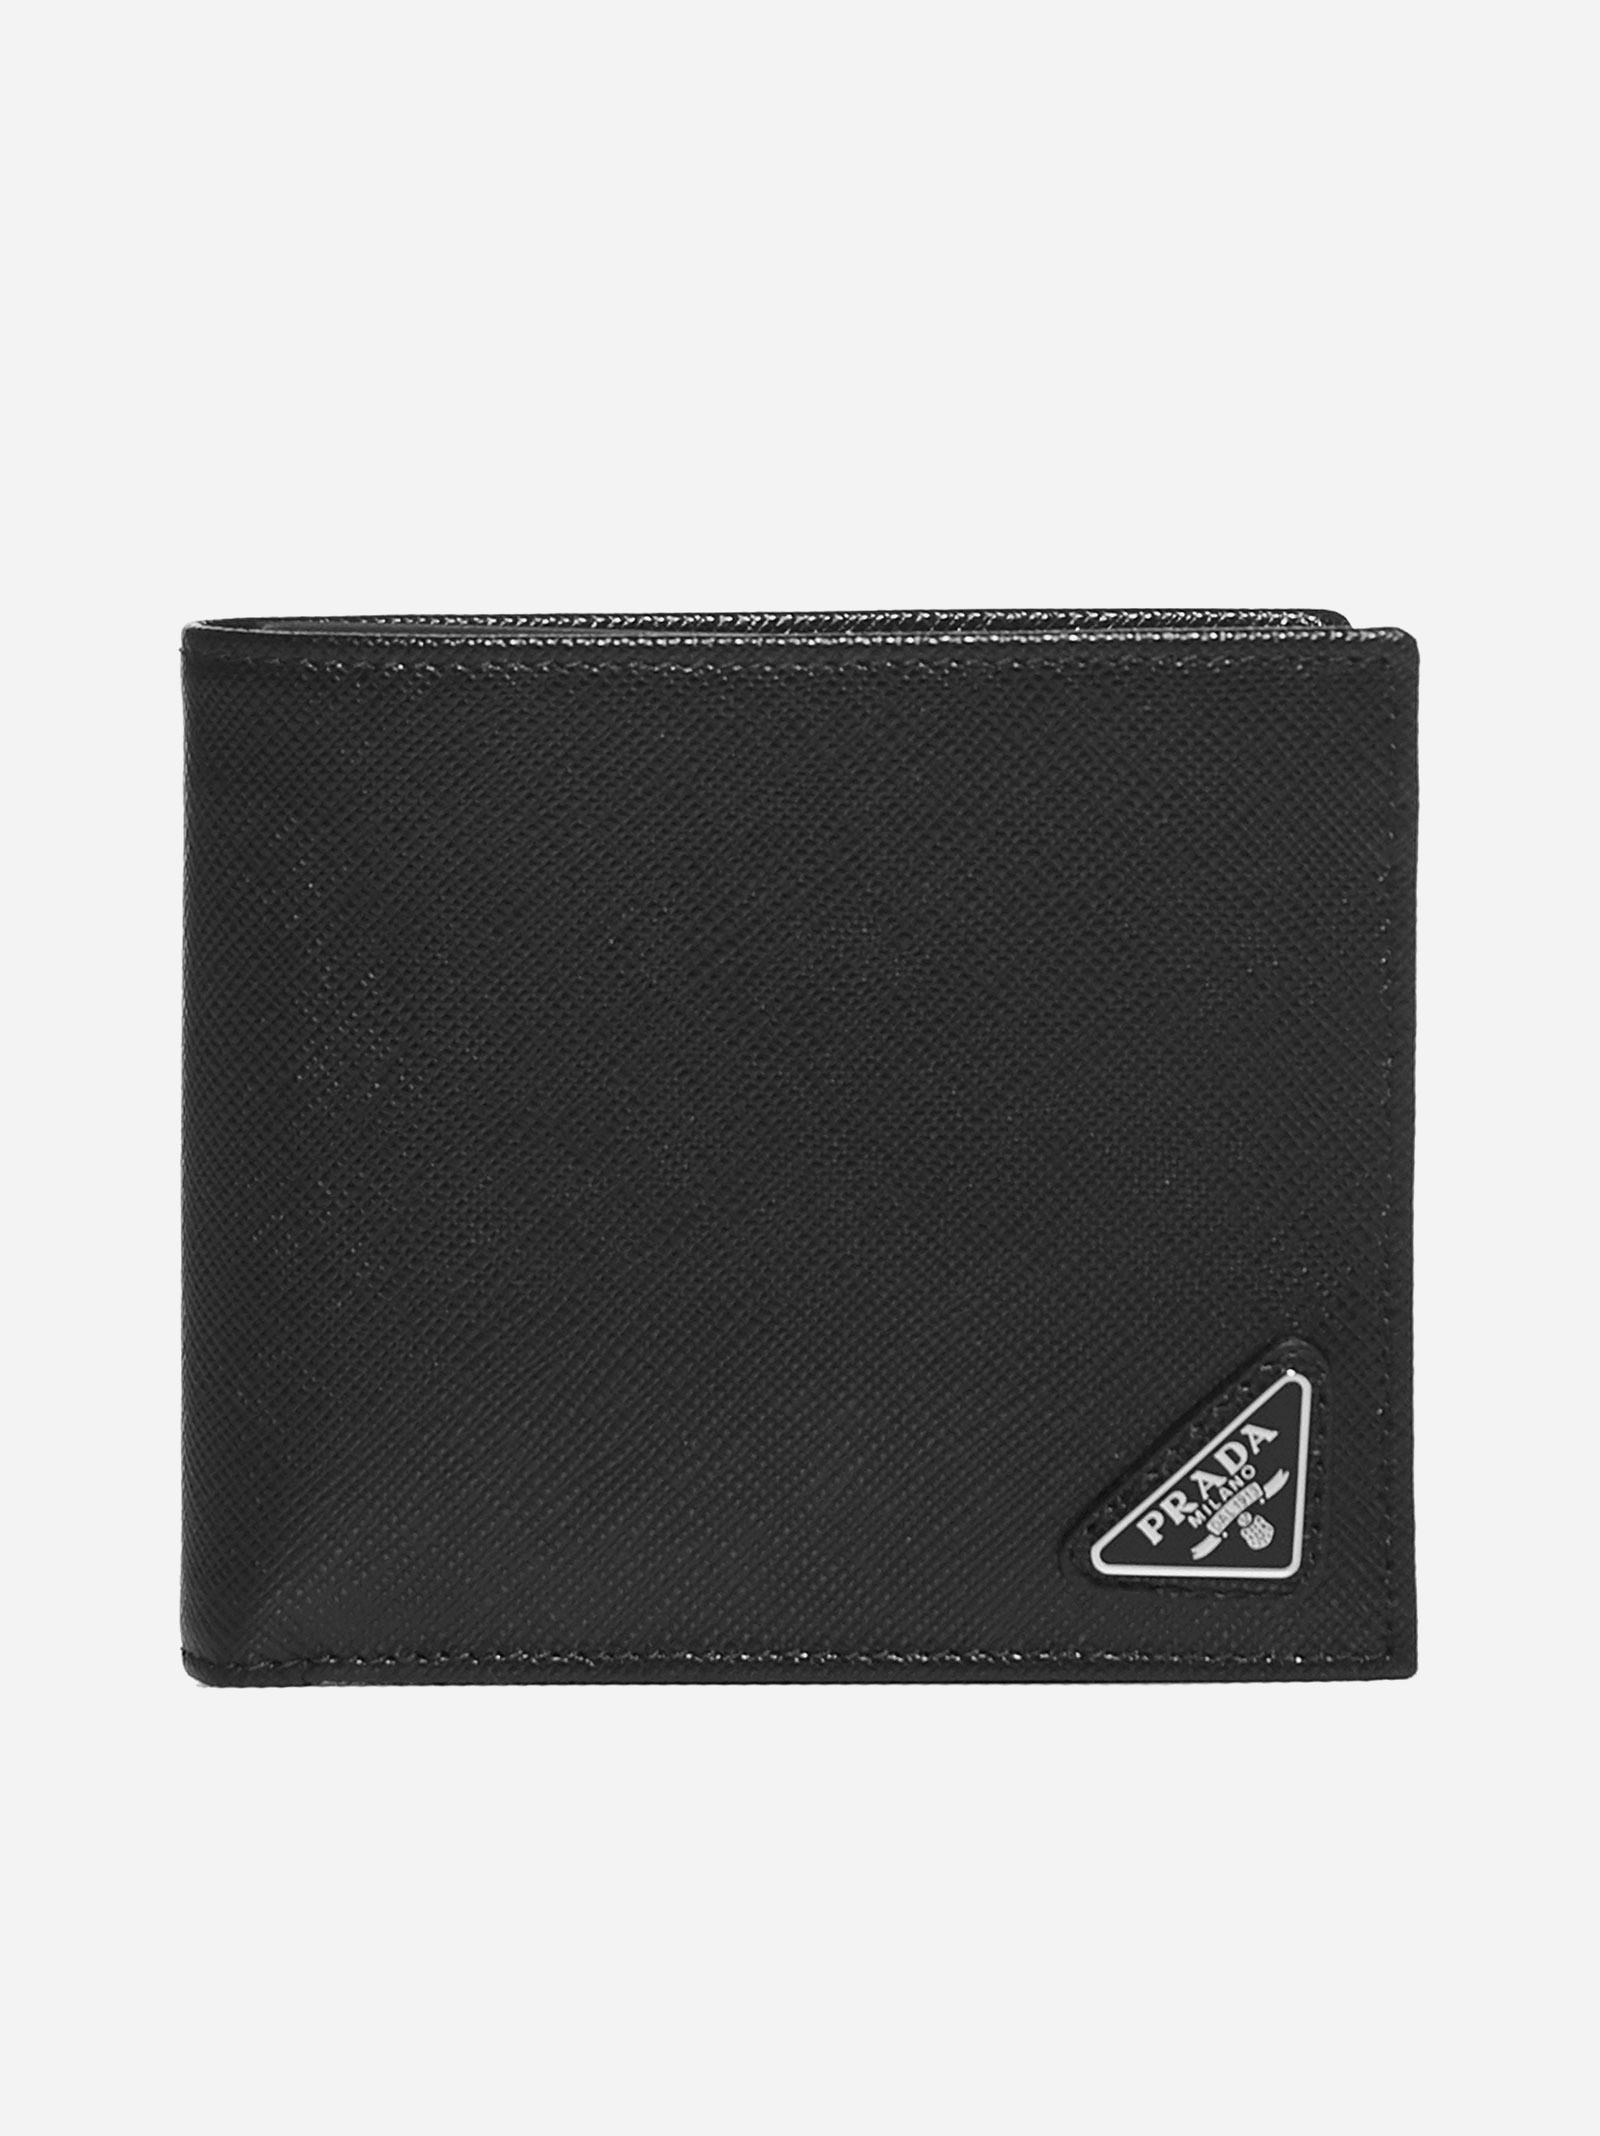 Saffiano leather bifold wallet - 1